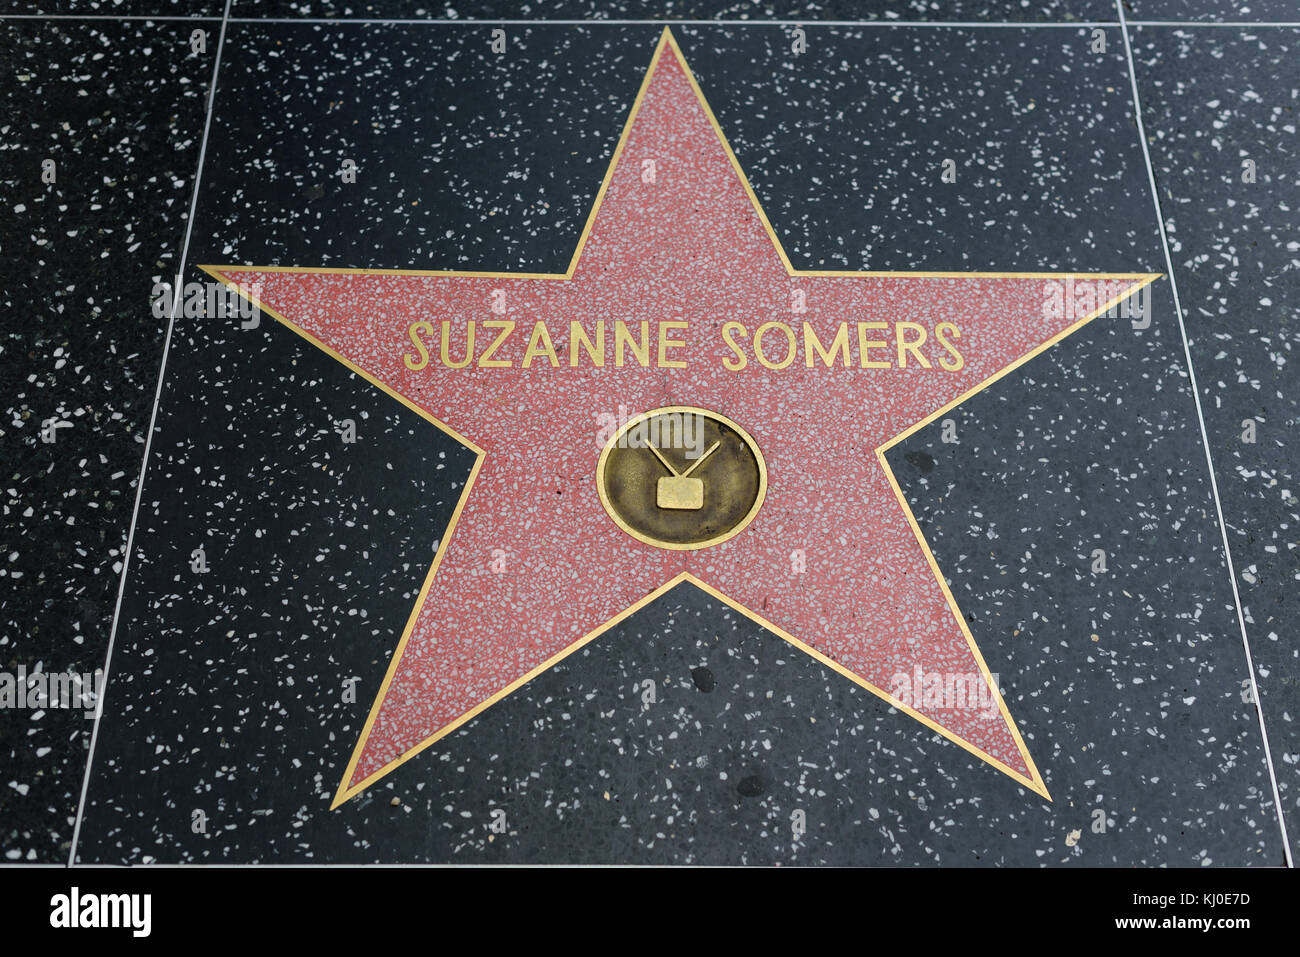 HOLLYWOOD, CA - DECEMBER 06: Suzanne Somers star on the Hollywood Walk of Fame in Hollywood, California on Dec. 6, 2016. Stock Photo